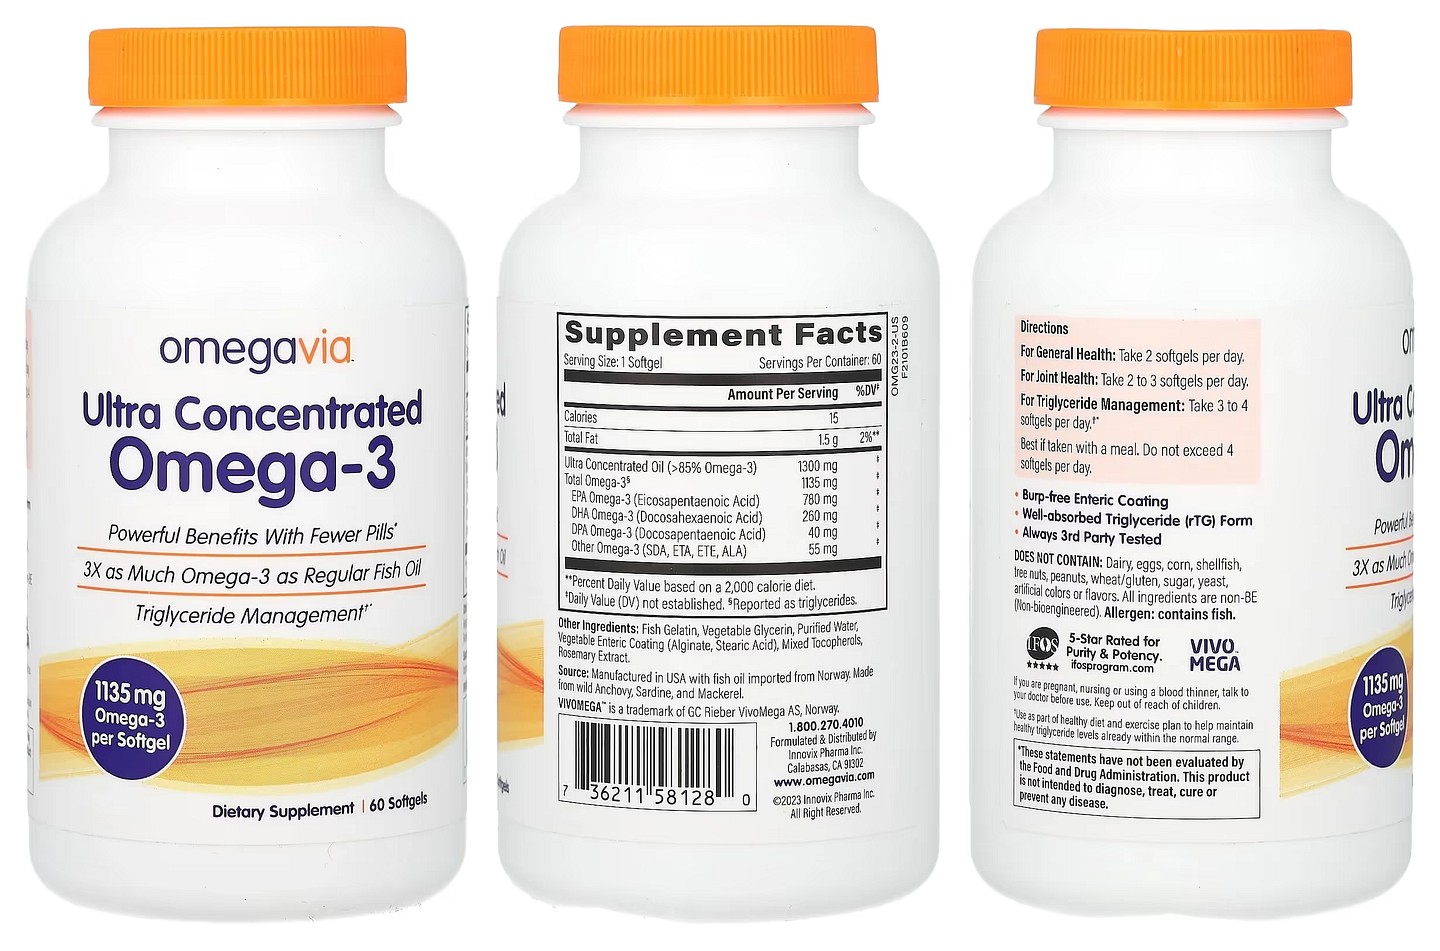 OmegaVia, Ultra Concentrated Omega-3 packaging